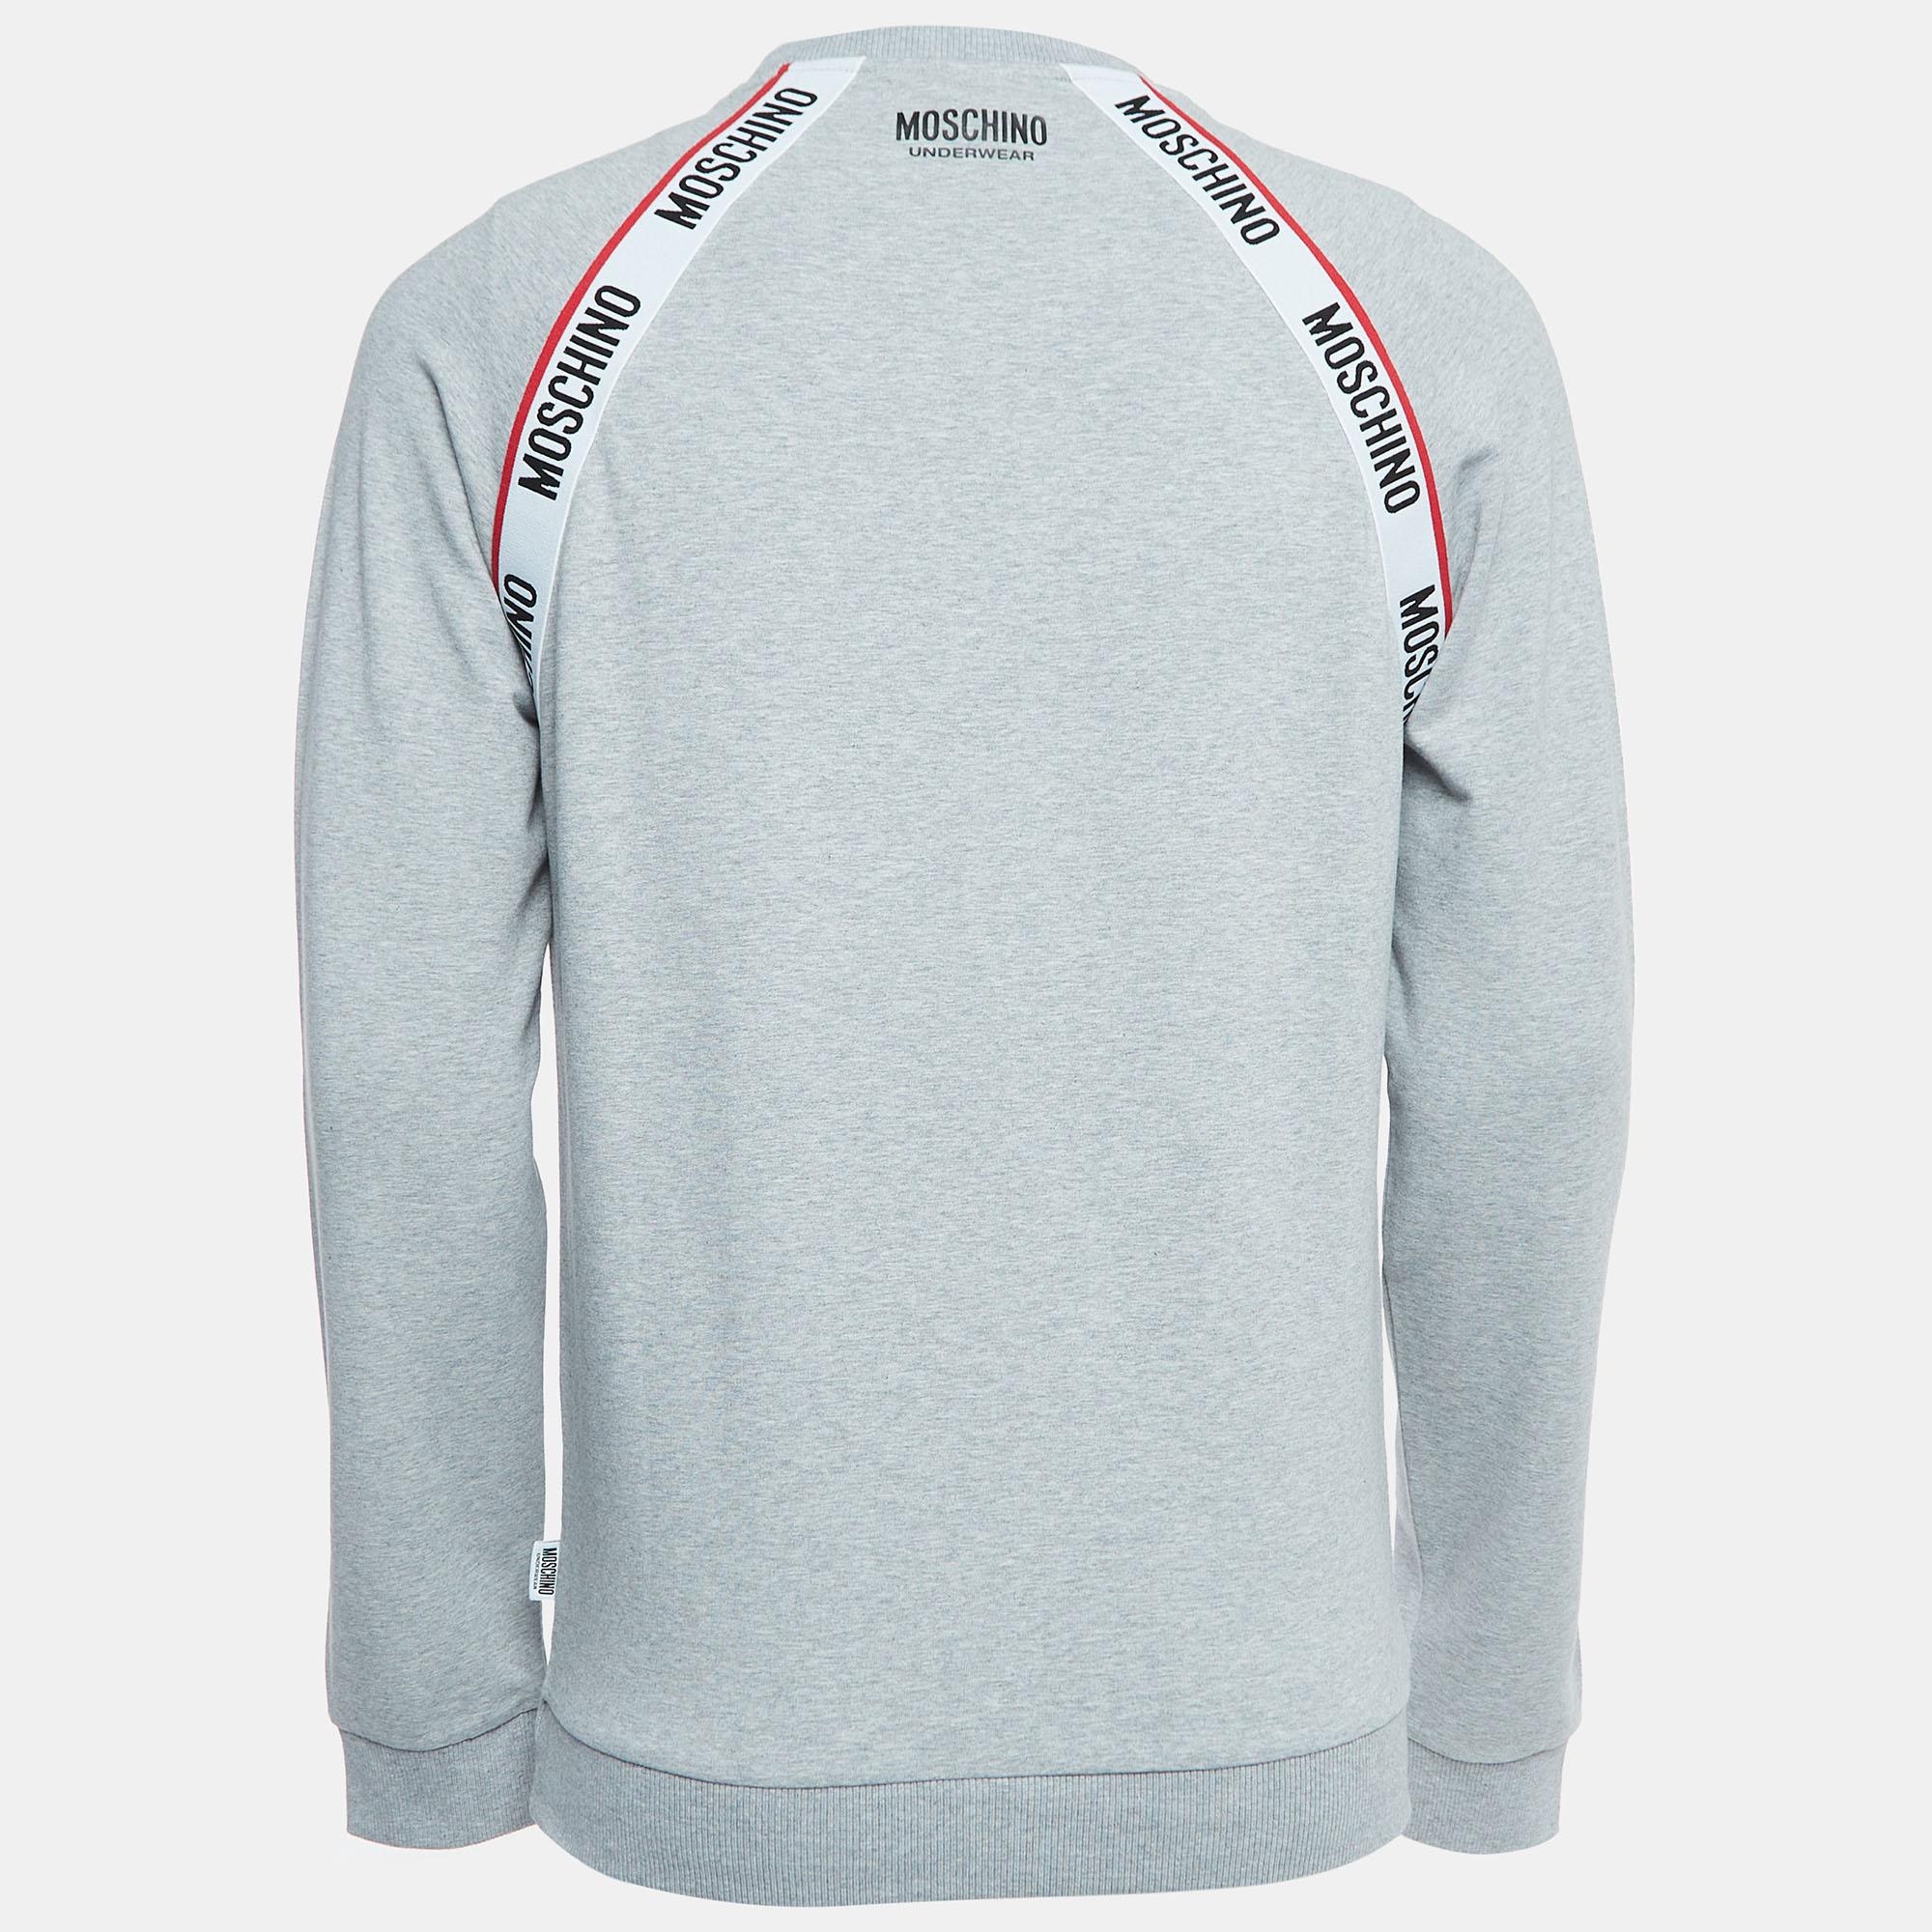 Whether you want to go out on casual outings with friends or just want to lounge around, this sweatshirt is a versatile piece and can be styled in many ways. It has been made using high-grade materials, and the creation will go well with basic denim